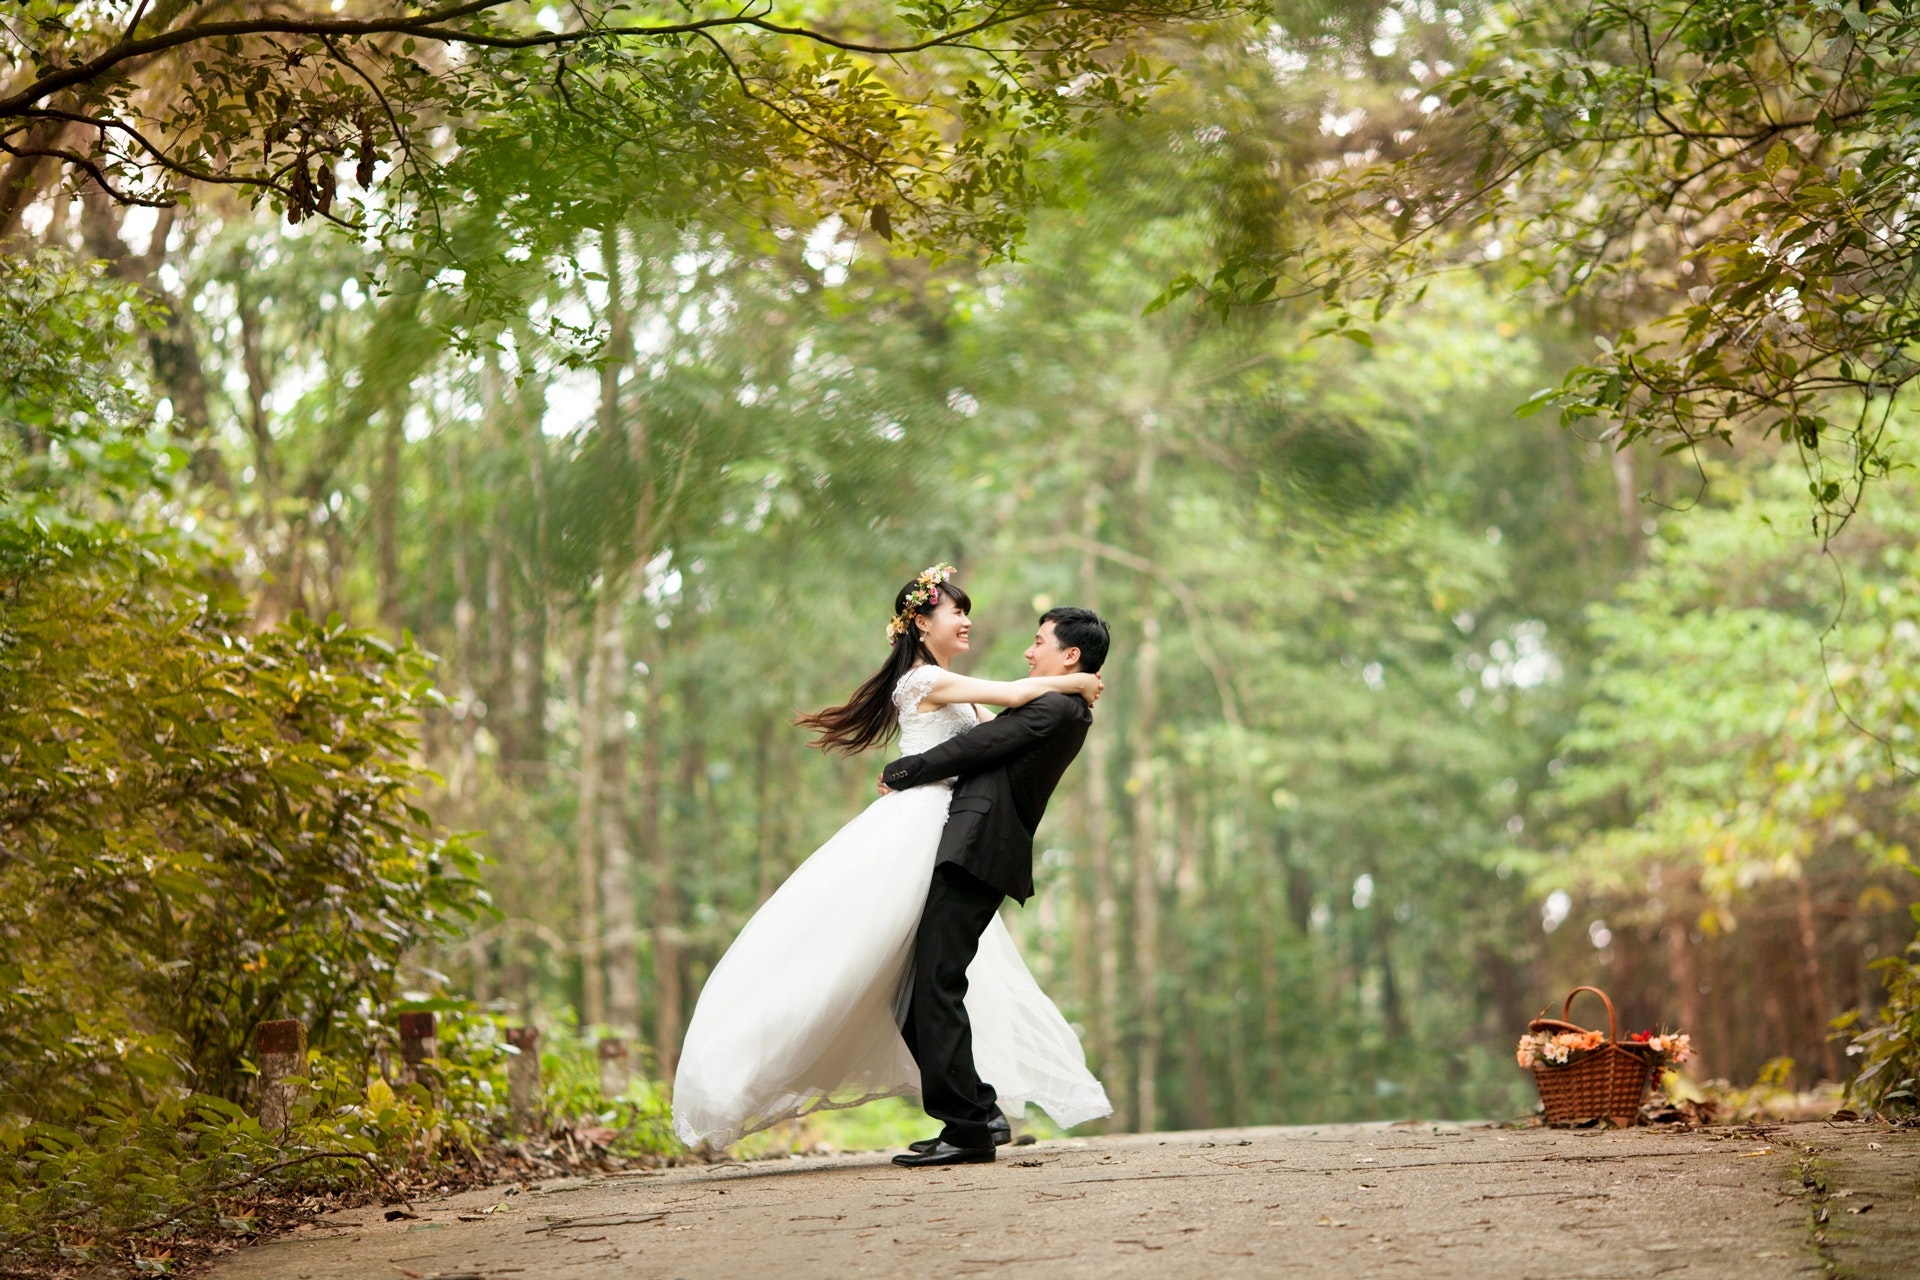 Wedding Couple Images Free Download - 1920x1280 Wallpaper 